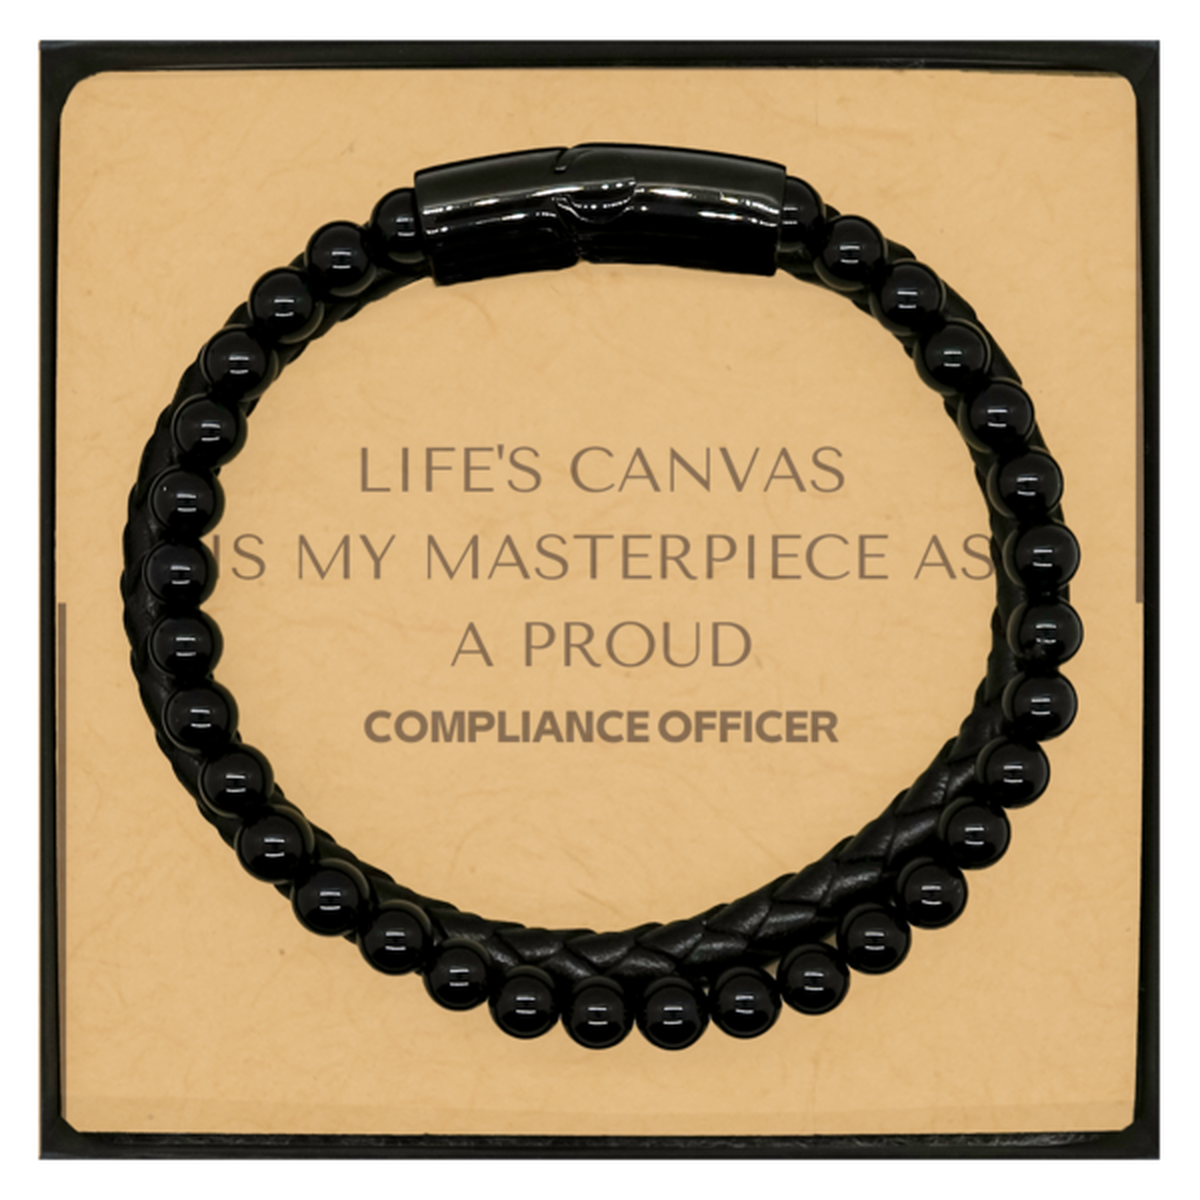 Proud Compliance Officer Gifts, Life's canvas is my masterpiece, Epic Birthday Christmas Unique Stone Leather Bracelets For Compliance Officer, Coworkers, Men, Women, Friends